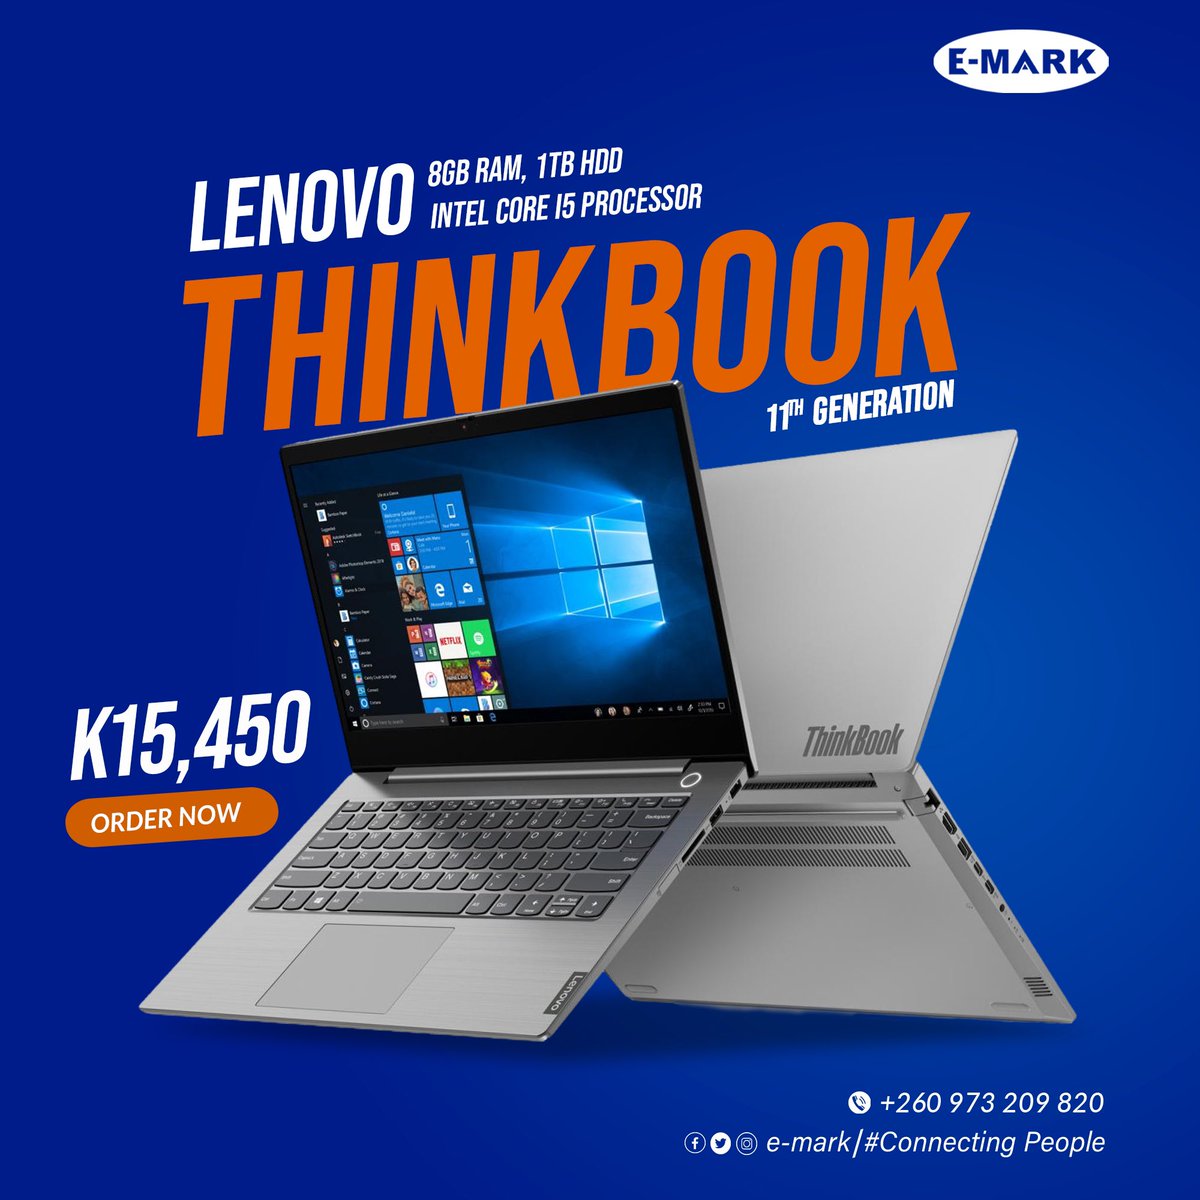 Lenovo Thinkbook, built for business and Designed for you.
#ThinkBookSeries #BusinessLaptop